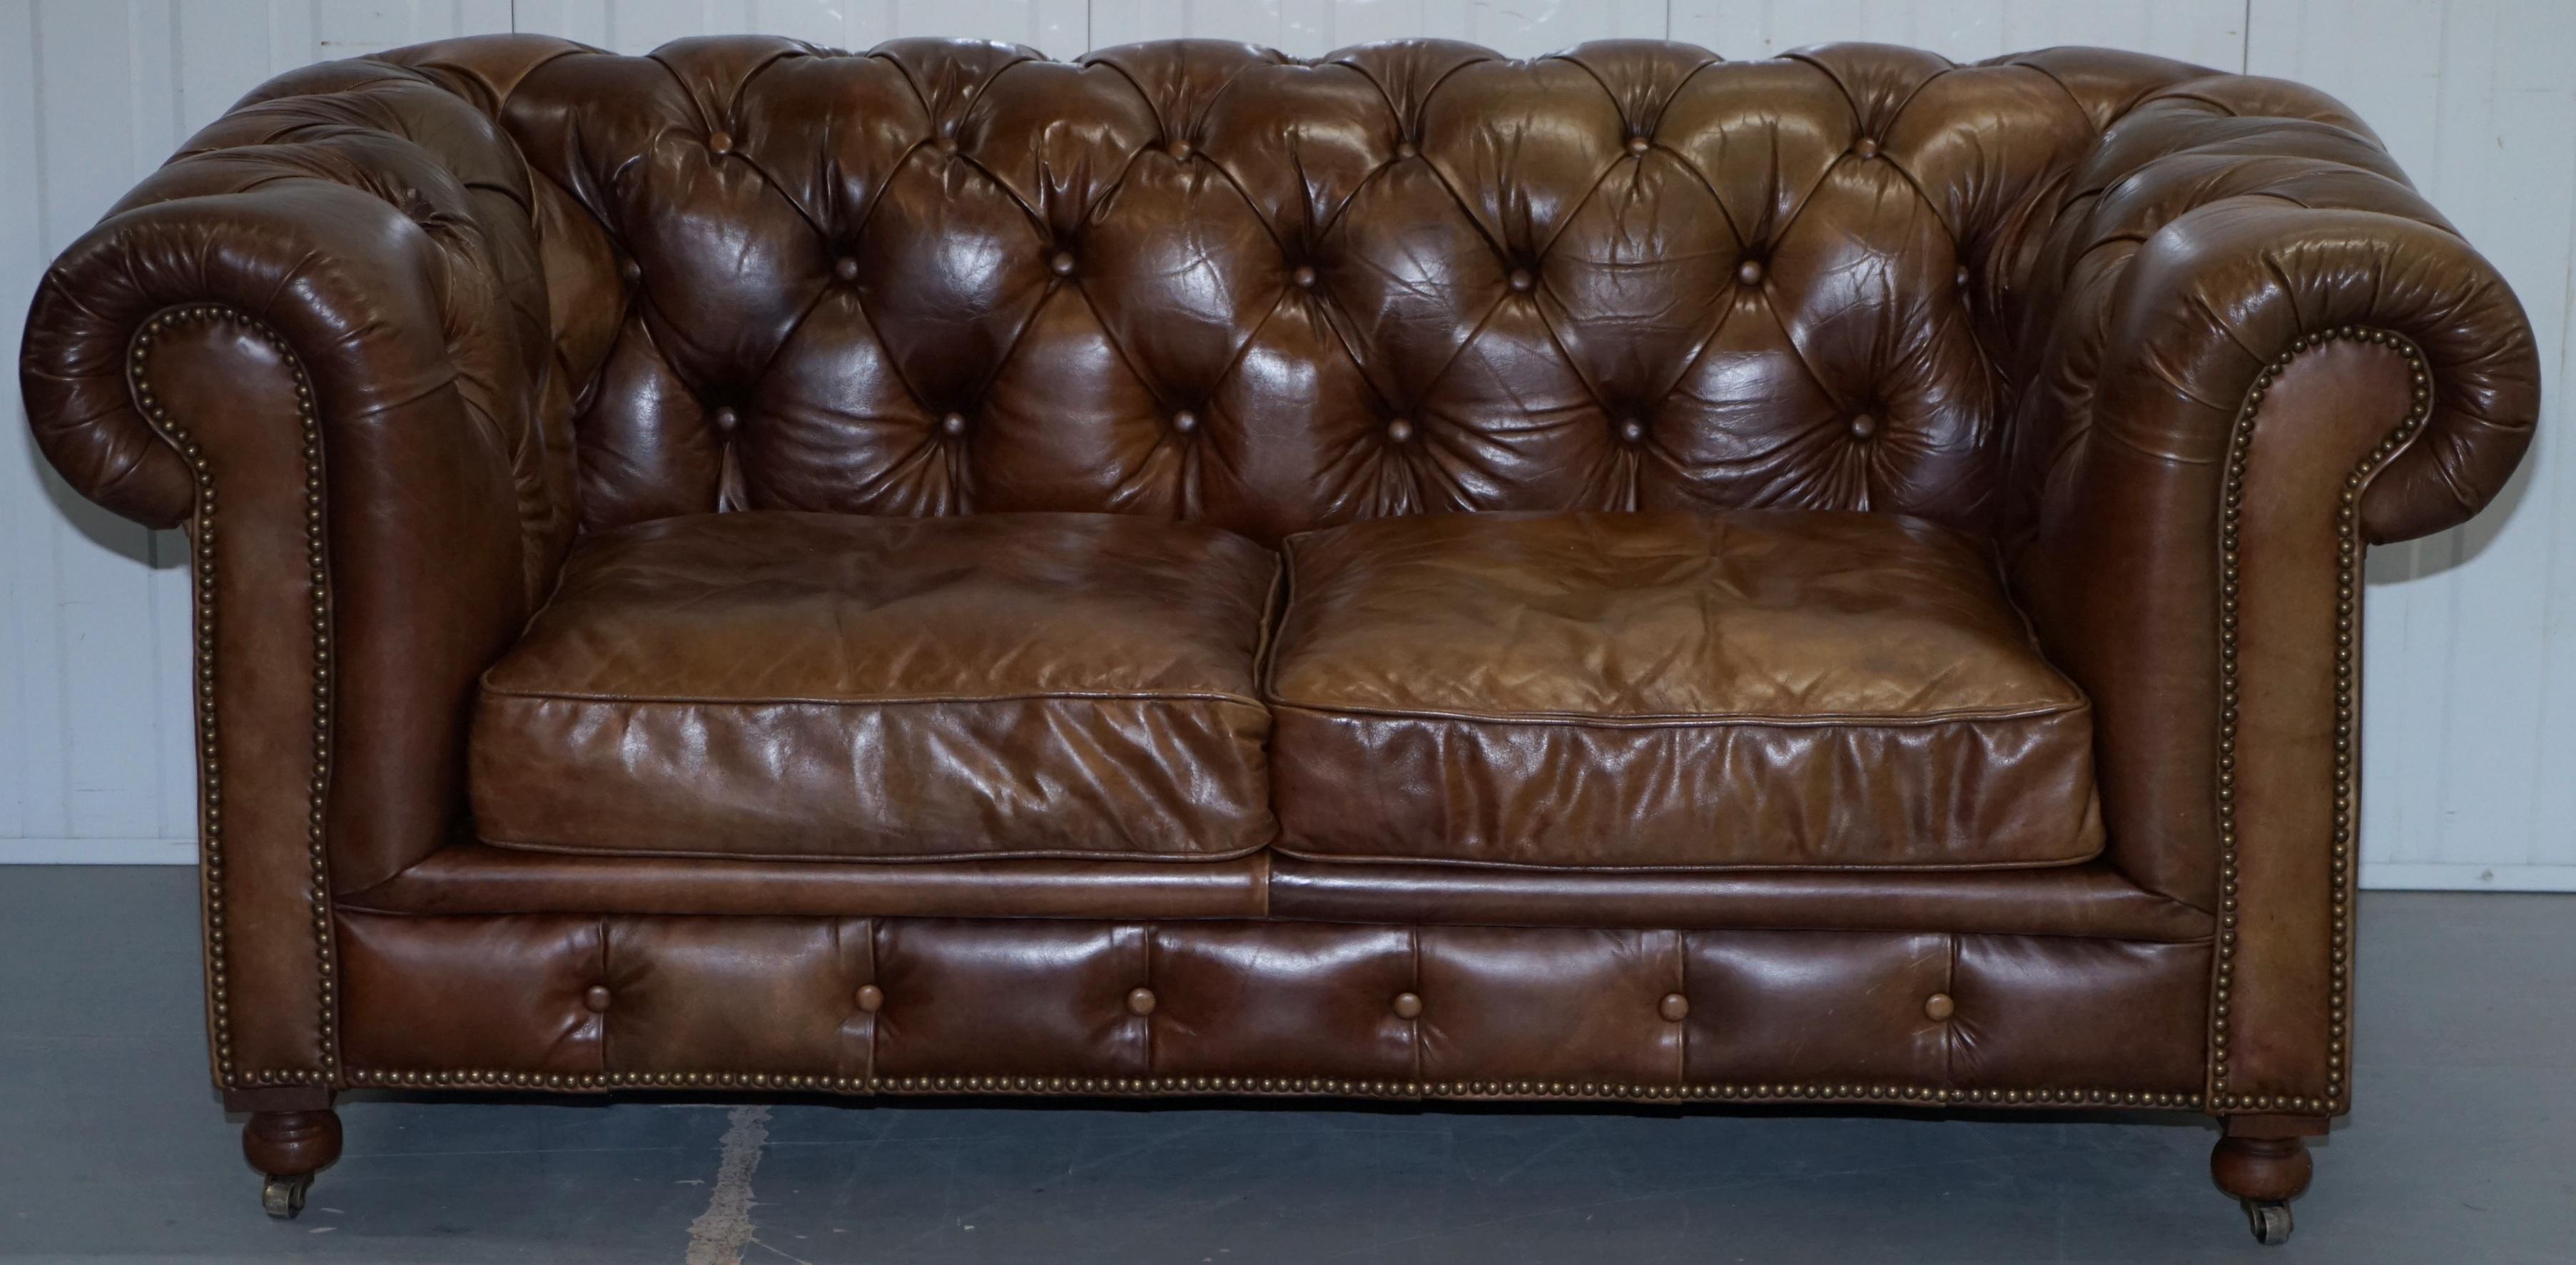 We are delighted to offer for sale one of two very nice Timothy Oulton Halo Westminster aged brown leather chesterfield sofas RRP £3839 each

This auction is for one, the other is listed under my other items, I also have the matching three-seat